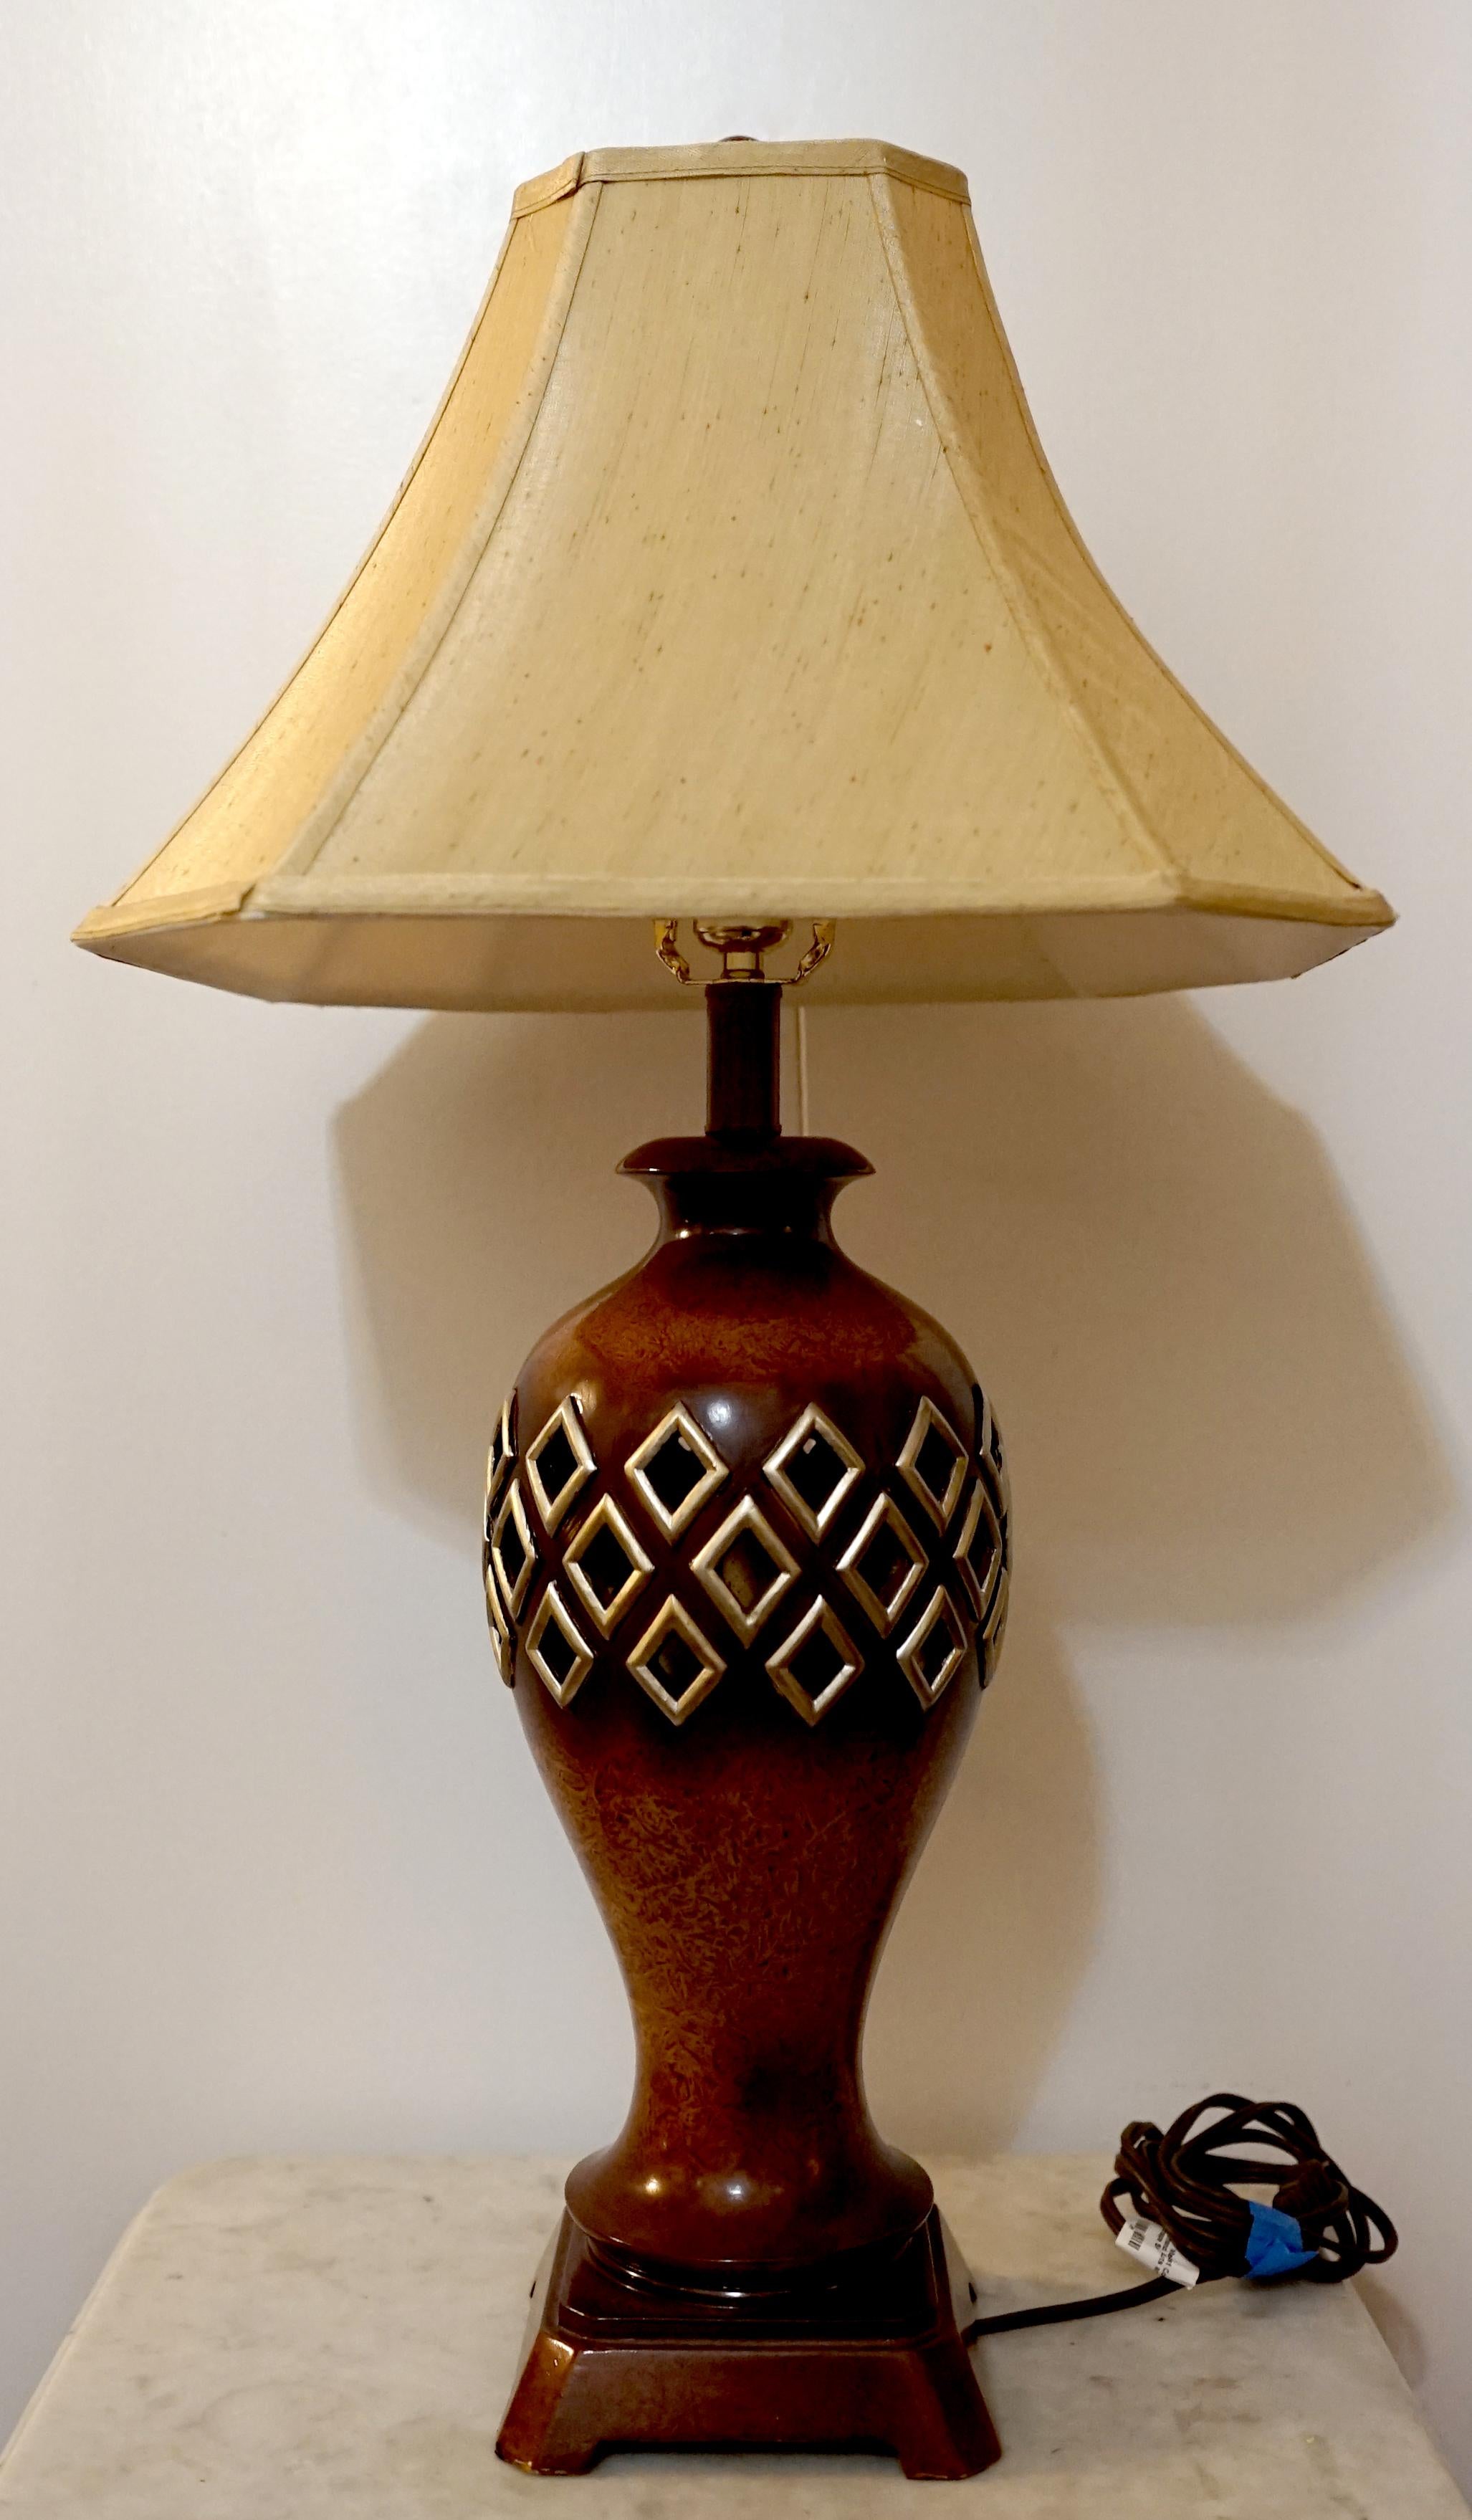 Regency Style Burled Baluster Diamond Cut-Out Wood Table Lamp For Sale 2